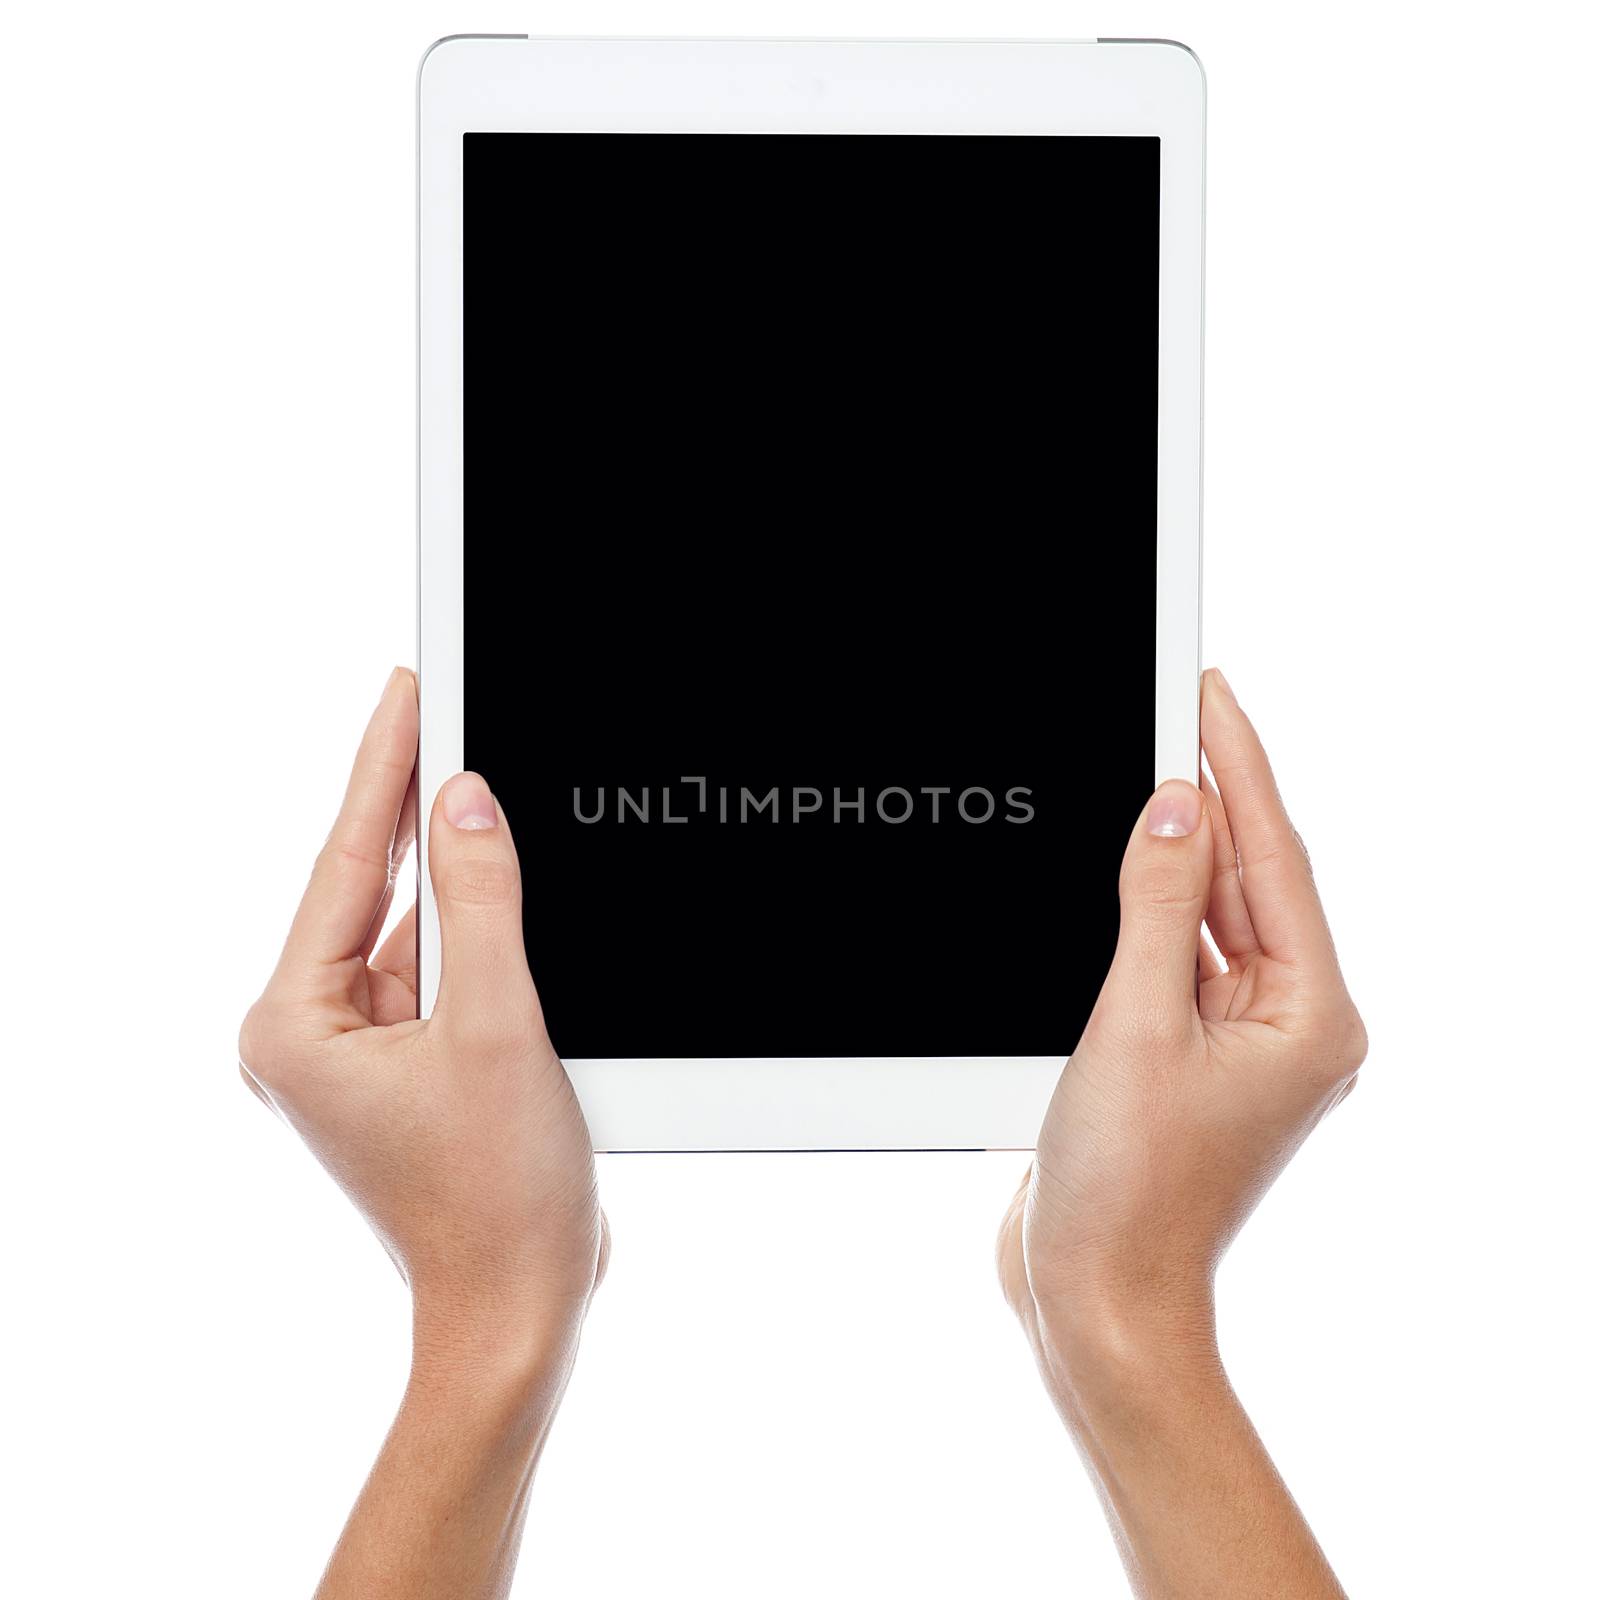 Image of newly launched tablet device by stockyimages